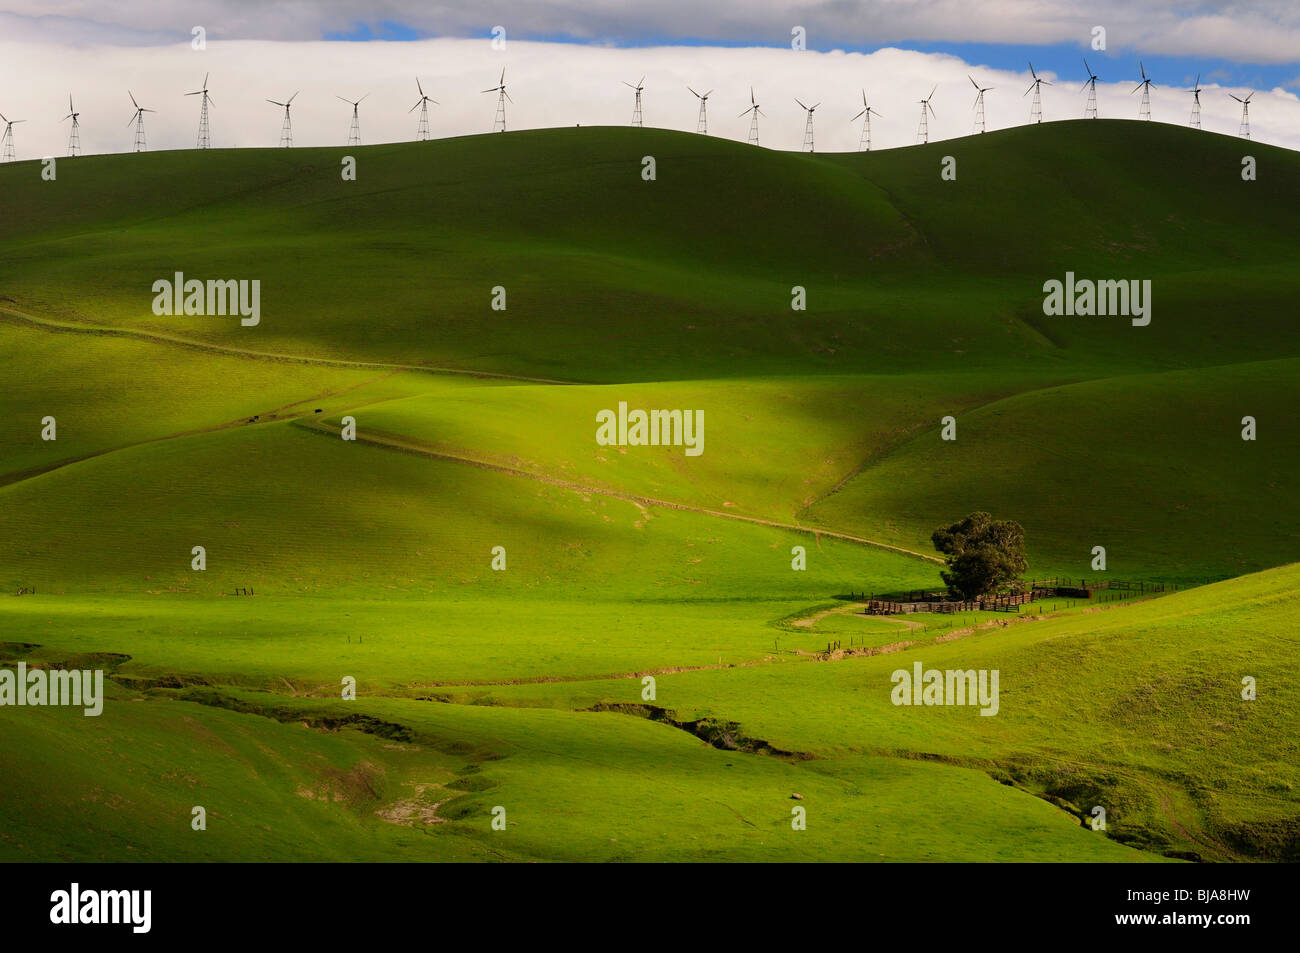 Dappled winter sun on the rolling green grass hills of the Altamont Pass hilltop wind farm green electric power generation in California USA Stock Photo